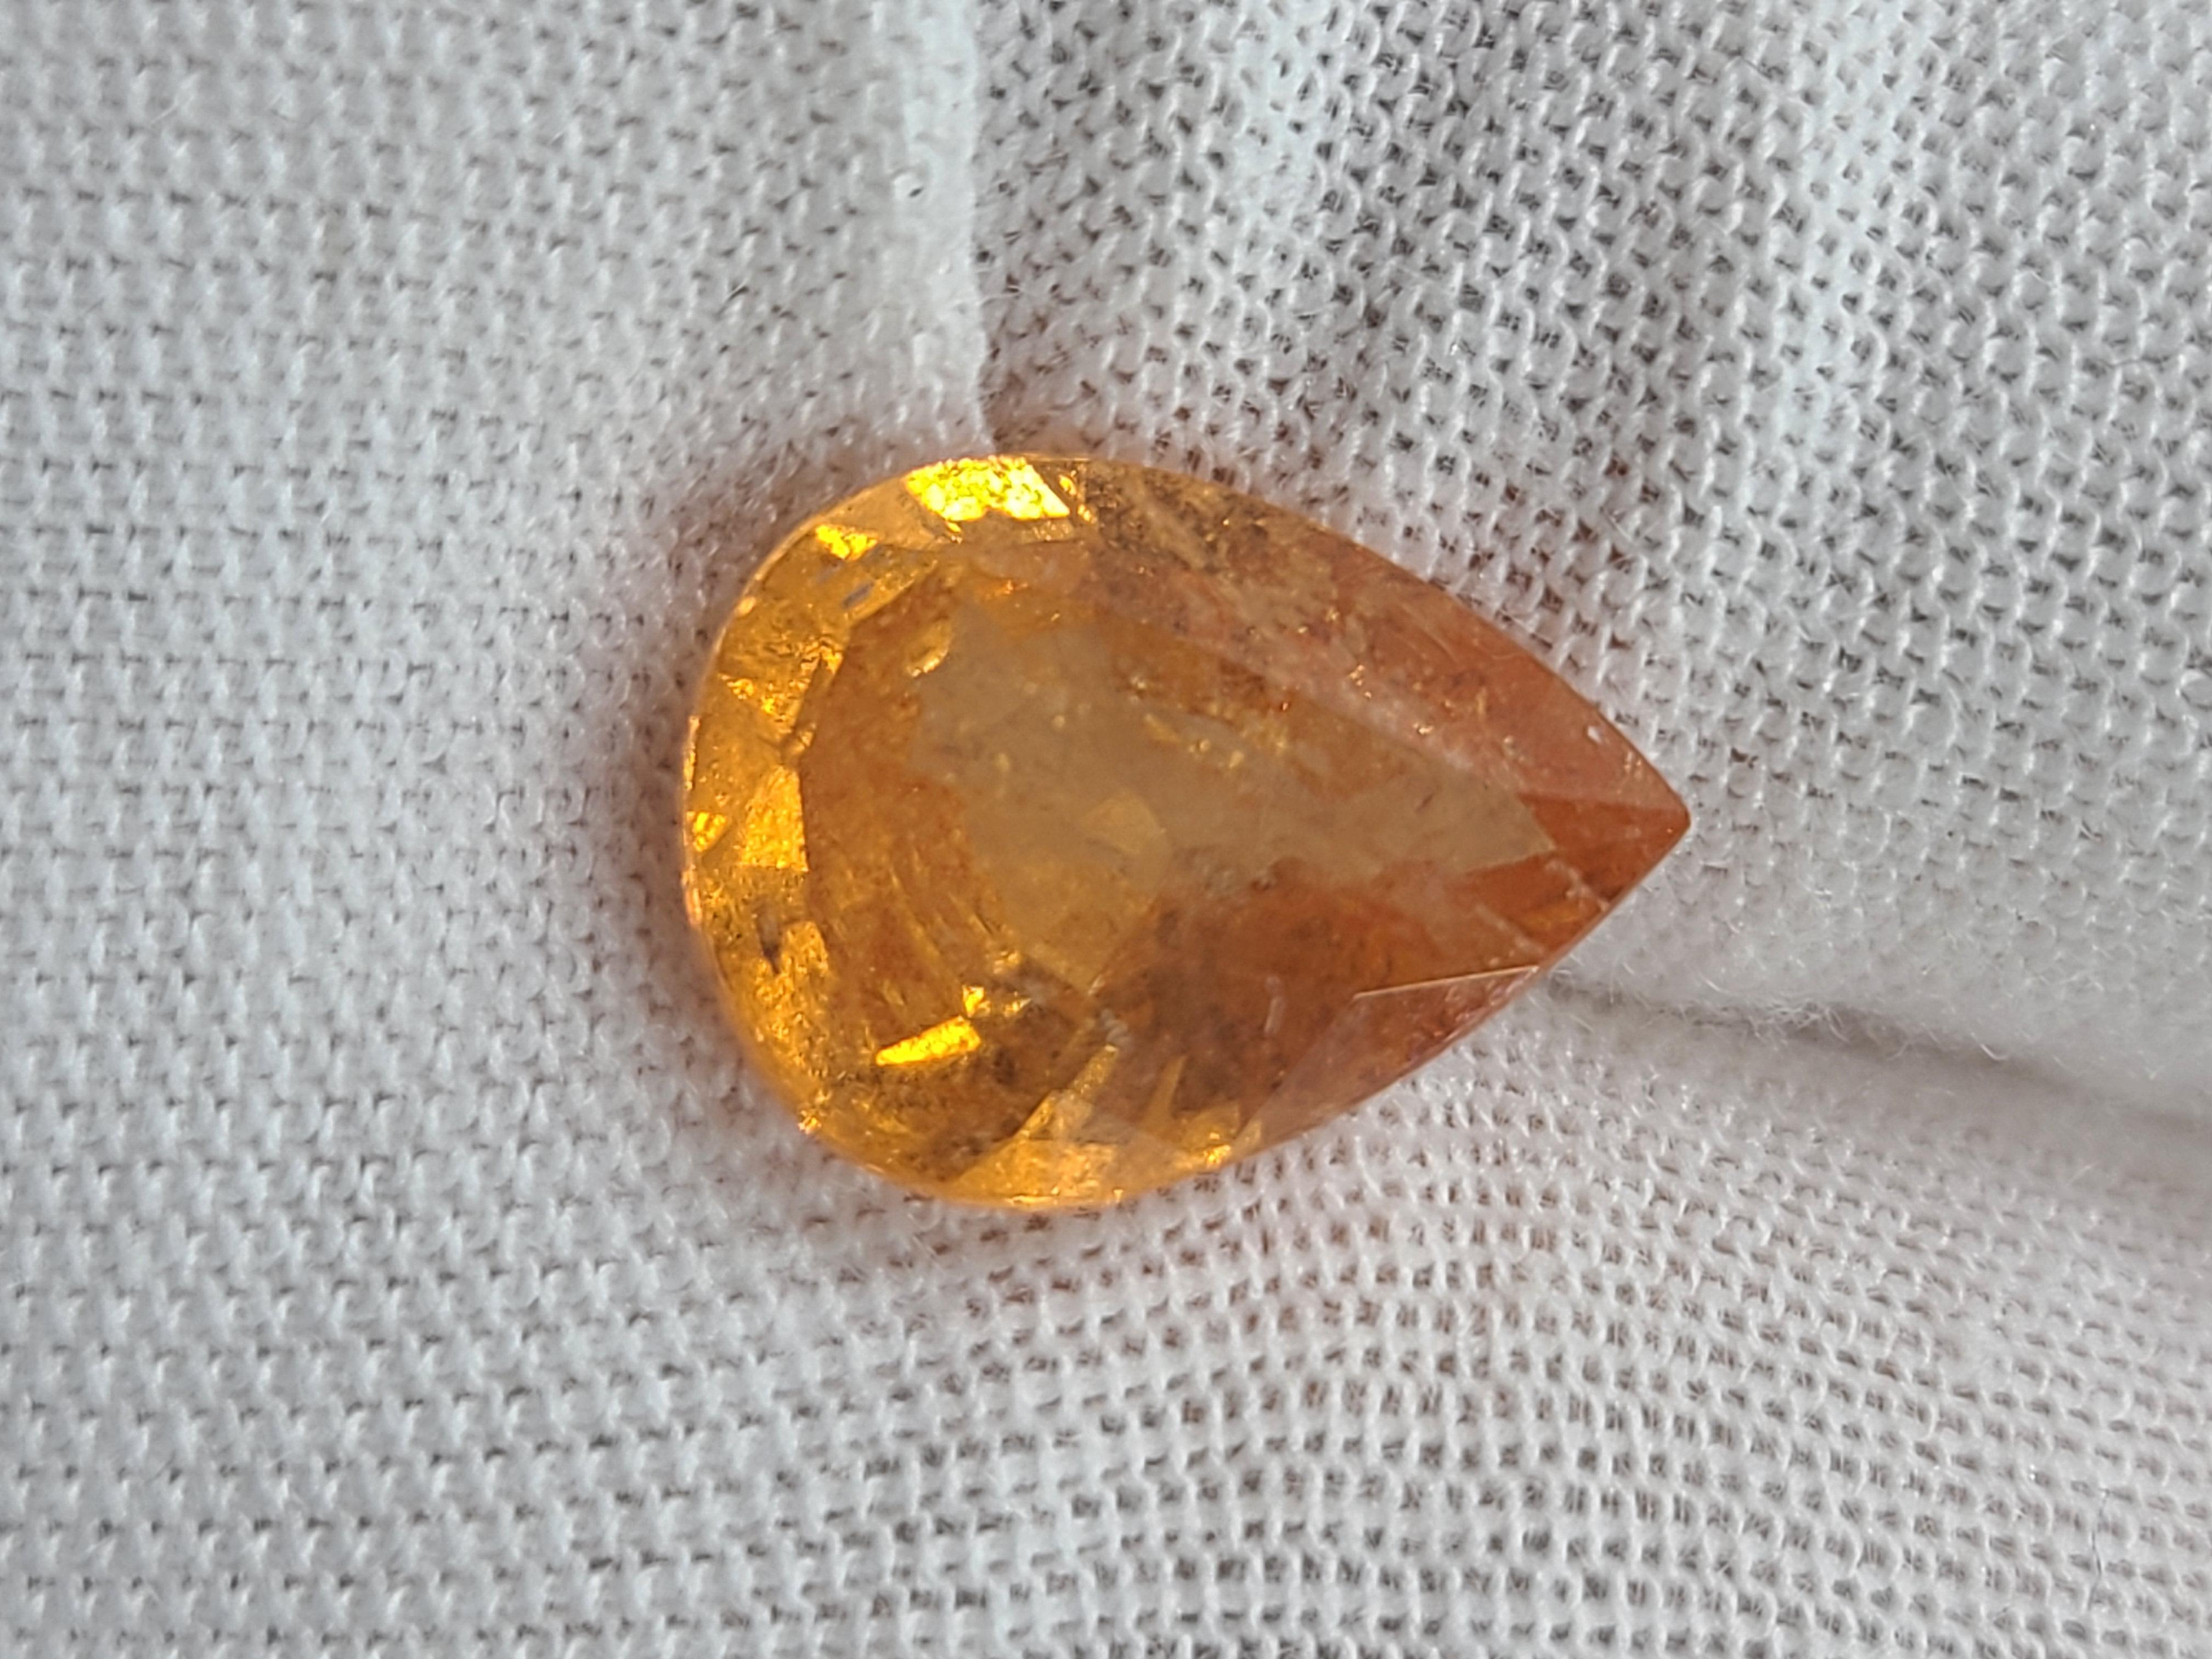 Add this naturally beautiful single loose gemstone to your gemstone collection, or set it into different mounting showcasing its stunning hue.

This pear-shaped spessartine garnet exhibits a deep yellowish-orange, measuring a standard 12mmx9mm with